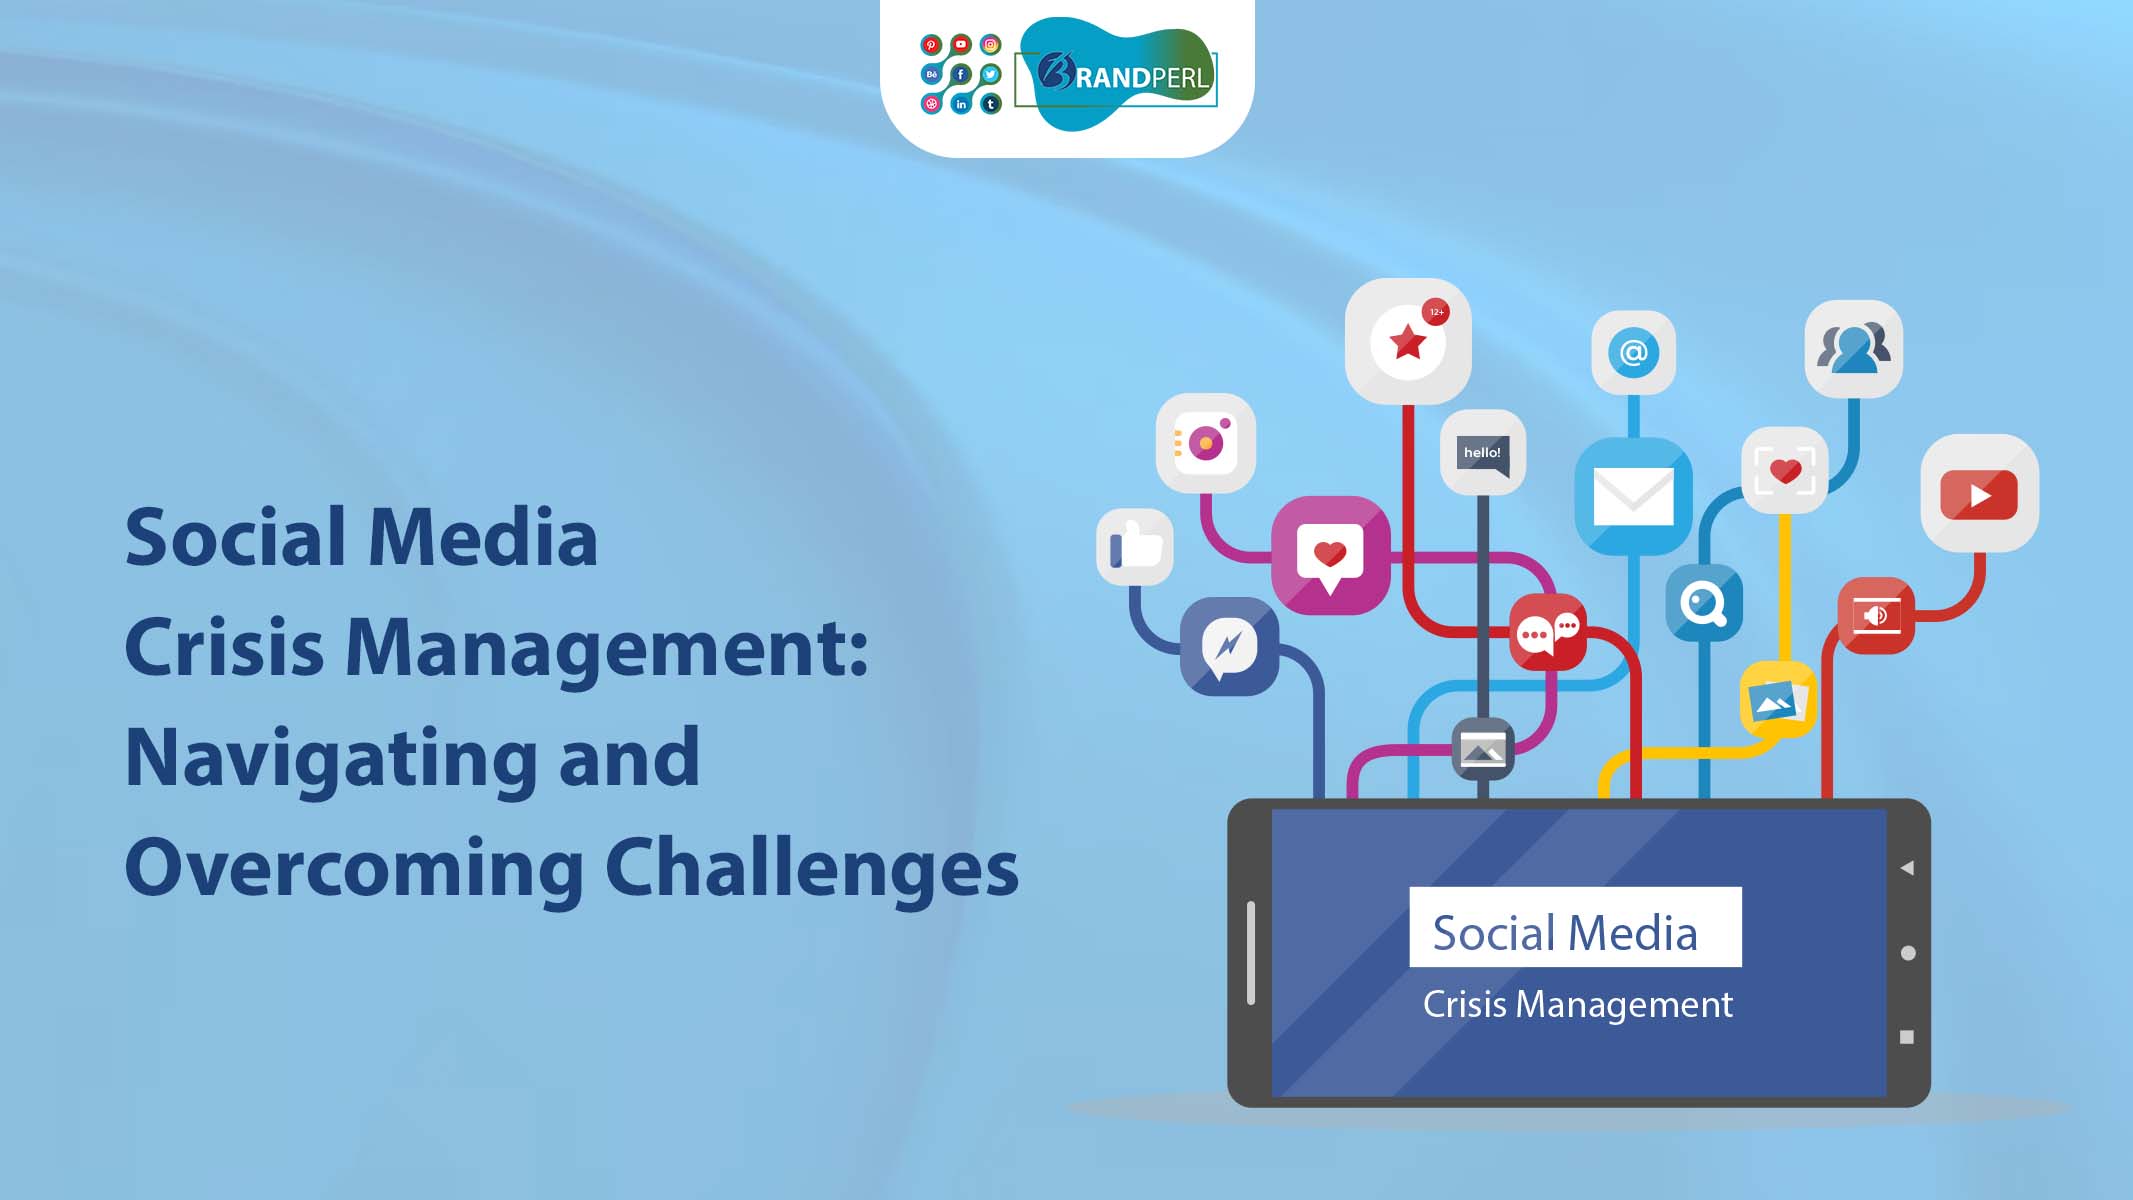 Social Media Crisis Management: Navigating and Overcoming Challenges